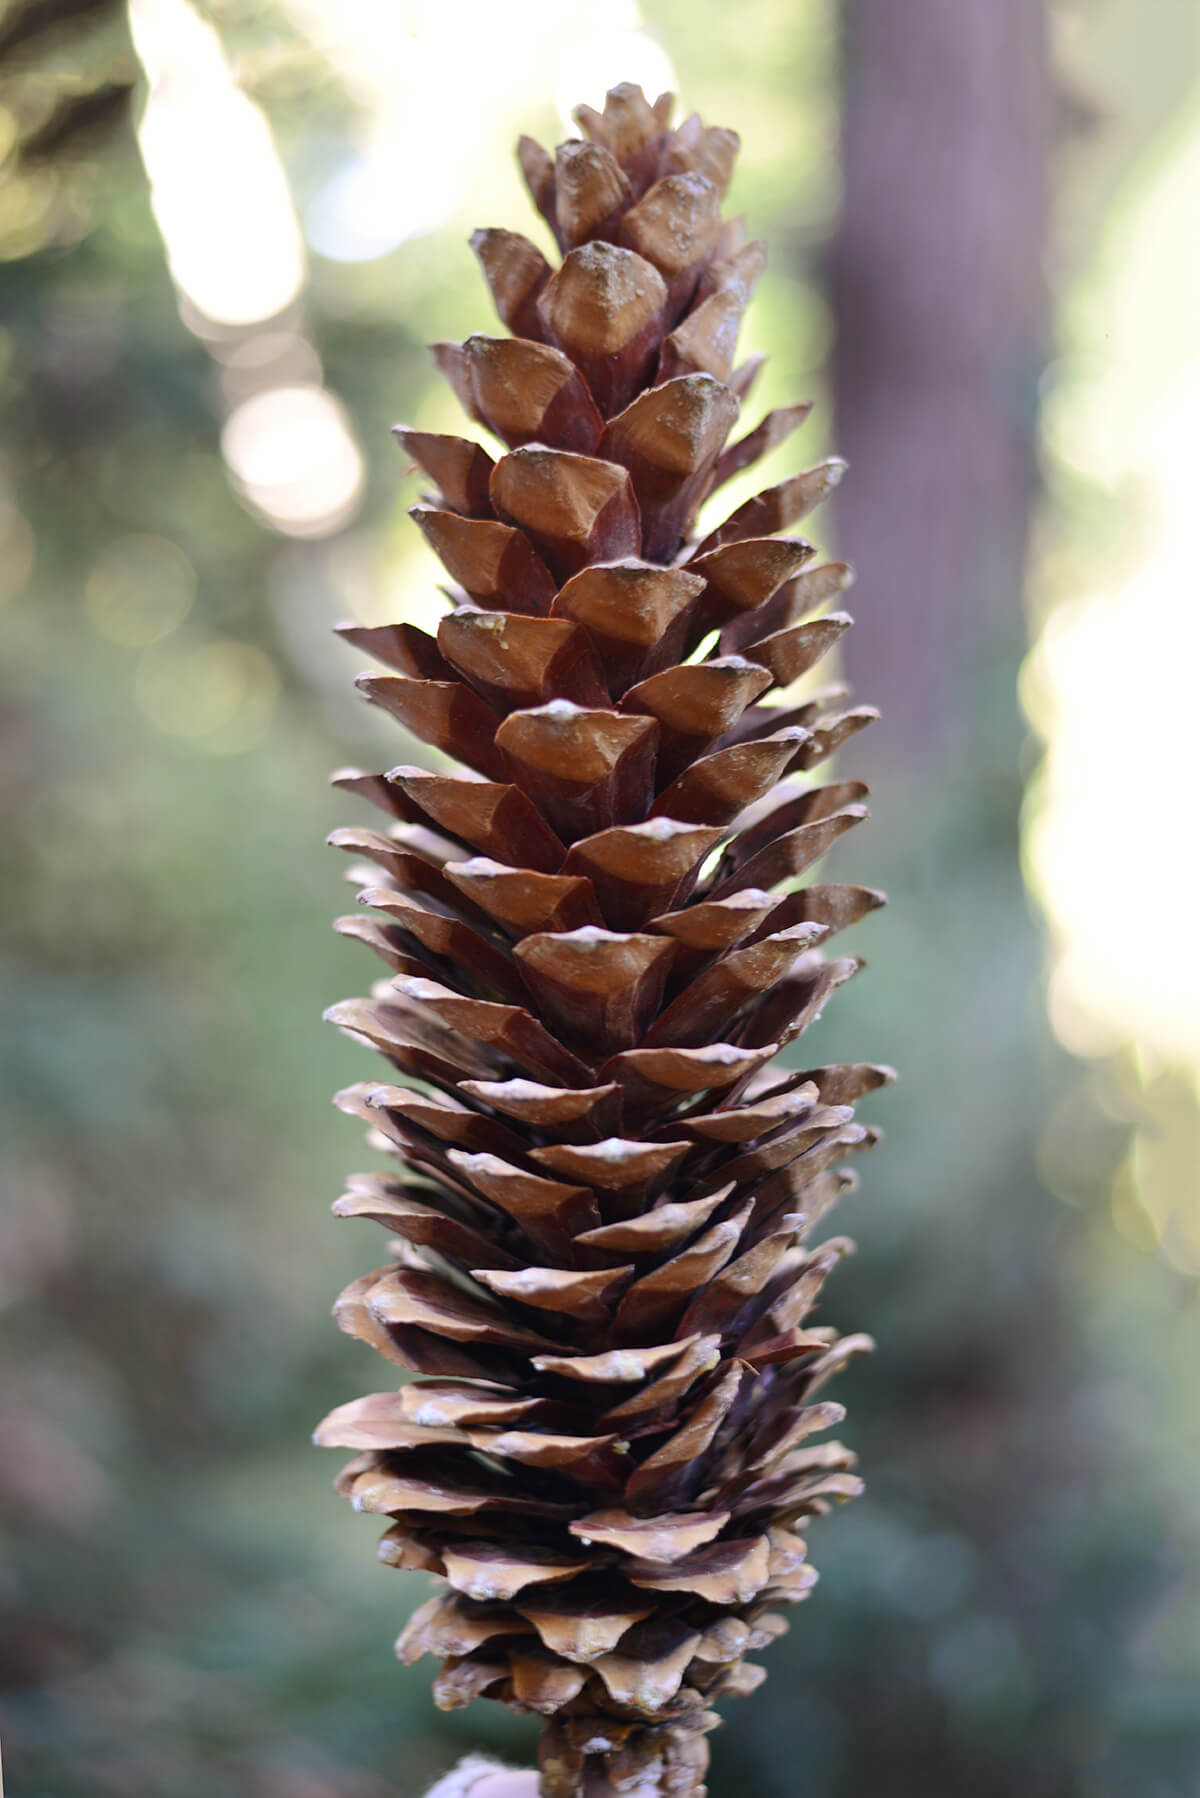 Where Do Pine Nuts Come From: Harvesting Pine Nuts From Pine Cones